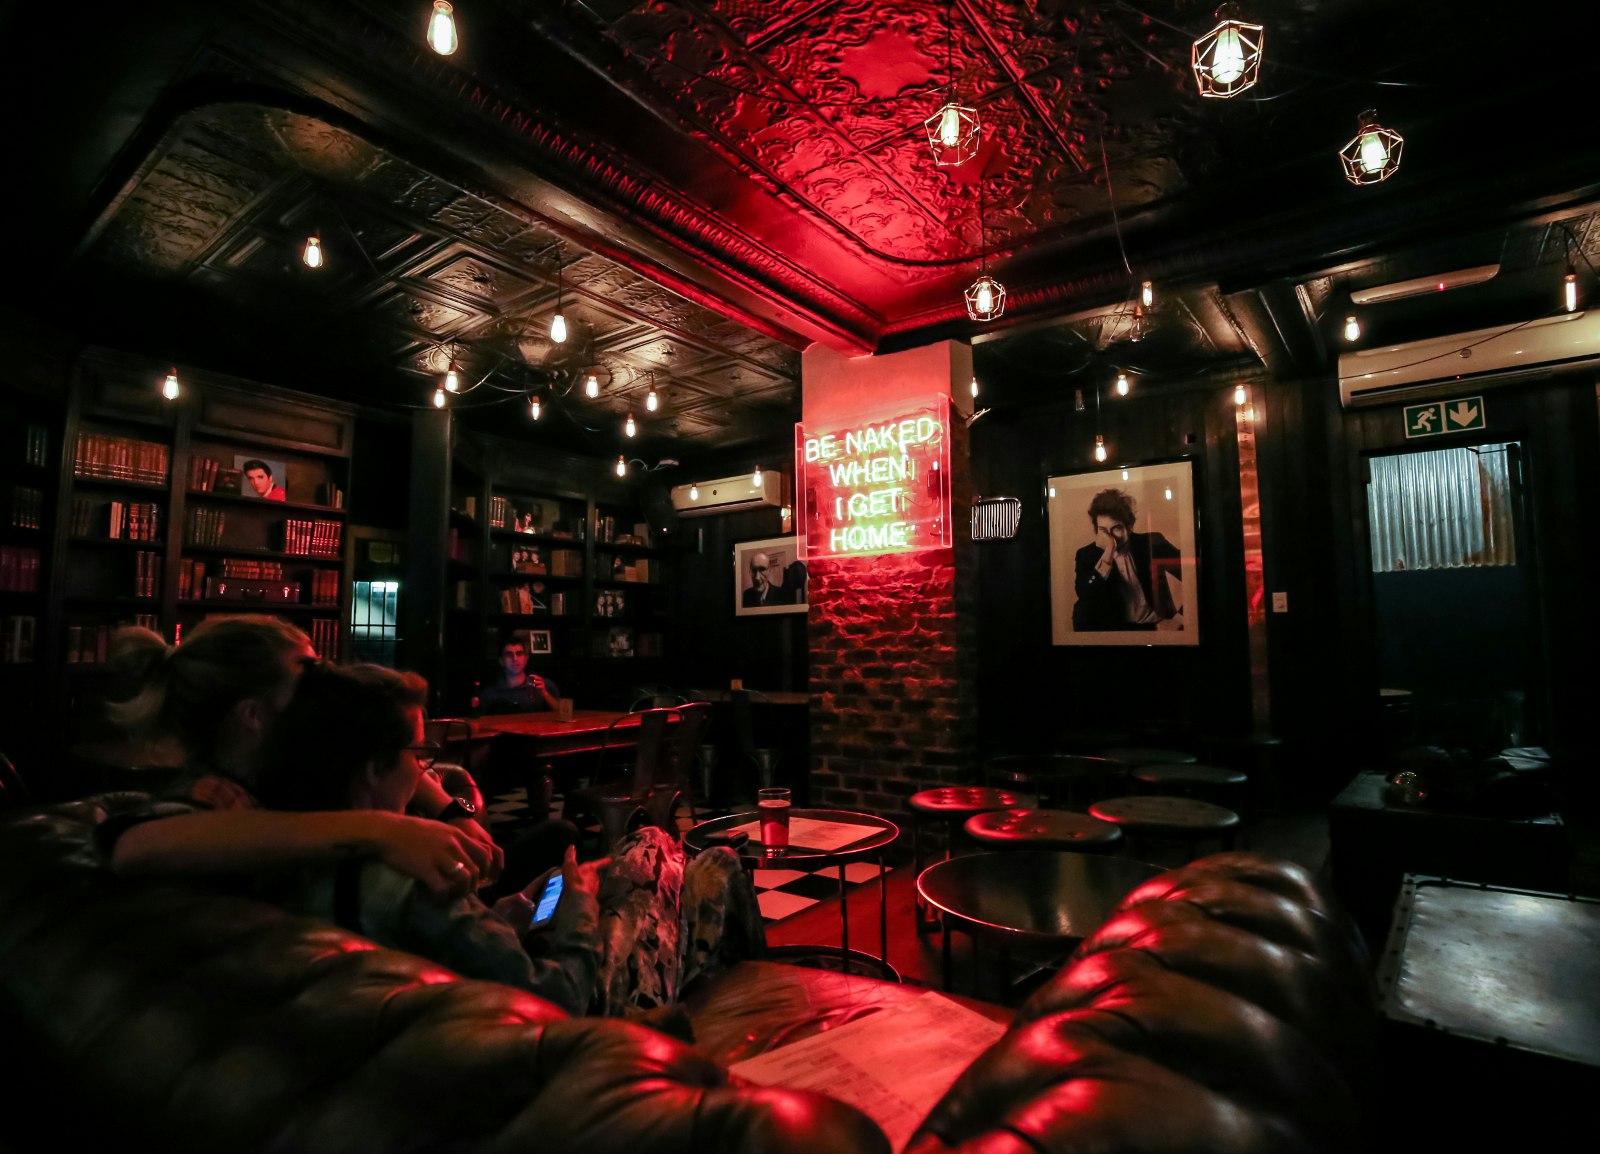 A couple sit in a leather chesterfield sofa in this darkened bar, with a red glow radiating across the ceiling, tables and sofa from a neon sign reading 'Be naked when I get home' - next to the sing is a framed black-and-white poster of Bob Dylan © Heather Mason / Lonely Planet